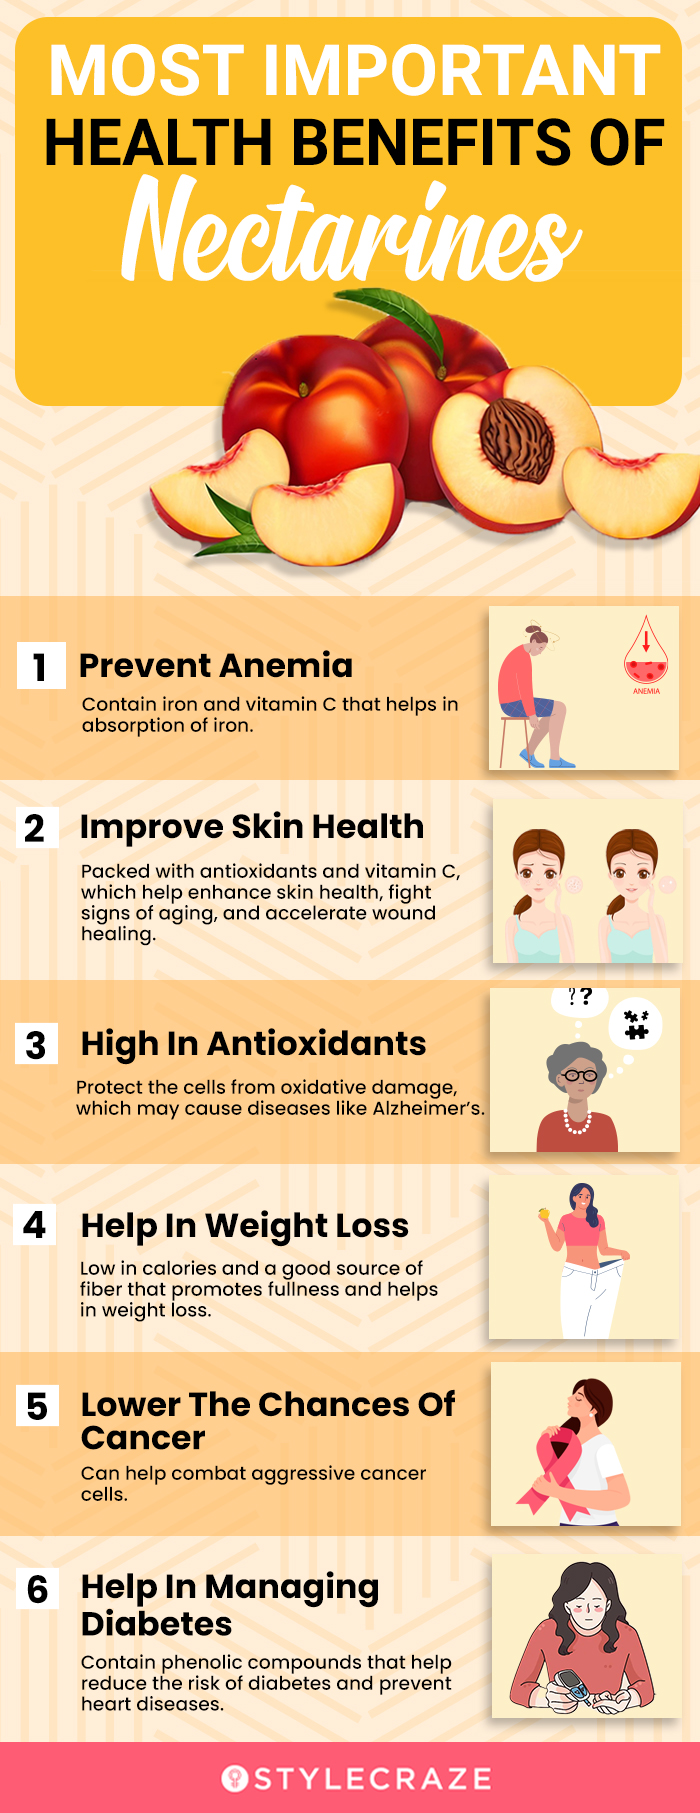 most important health benefits of nectarines [infographic]